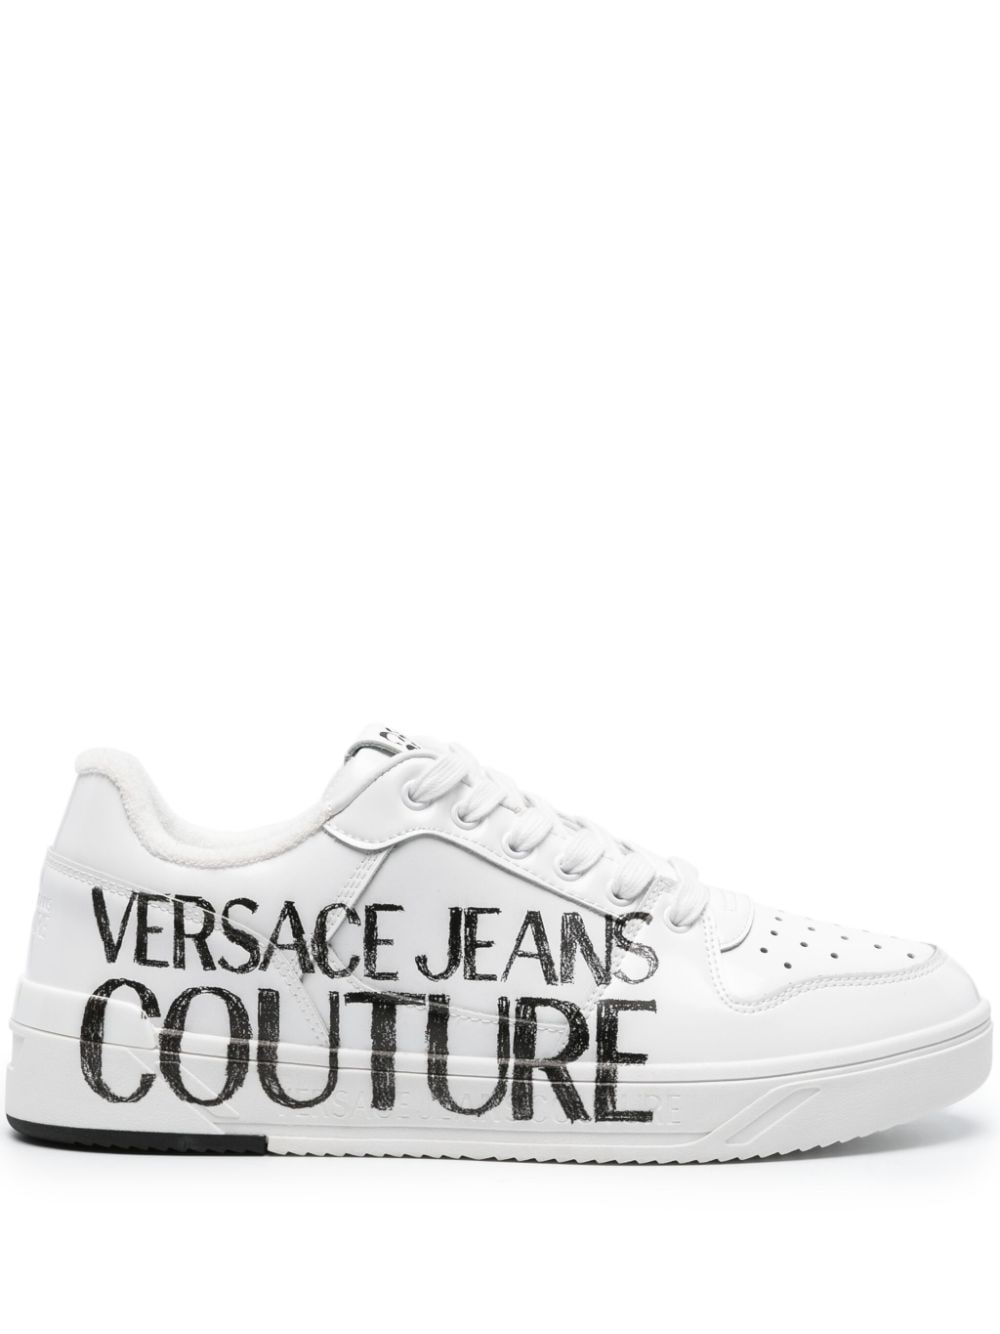 Versace Jeans Couture Starlight logo-print leather sneakers - White von Versace Jeans Couture